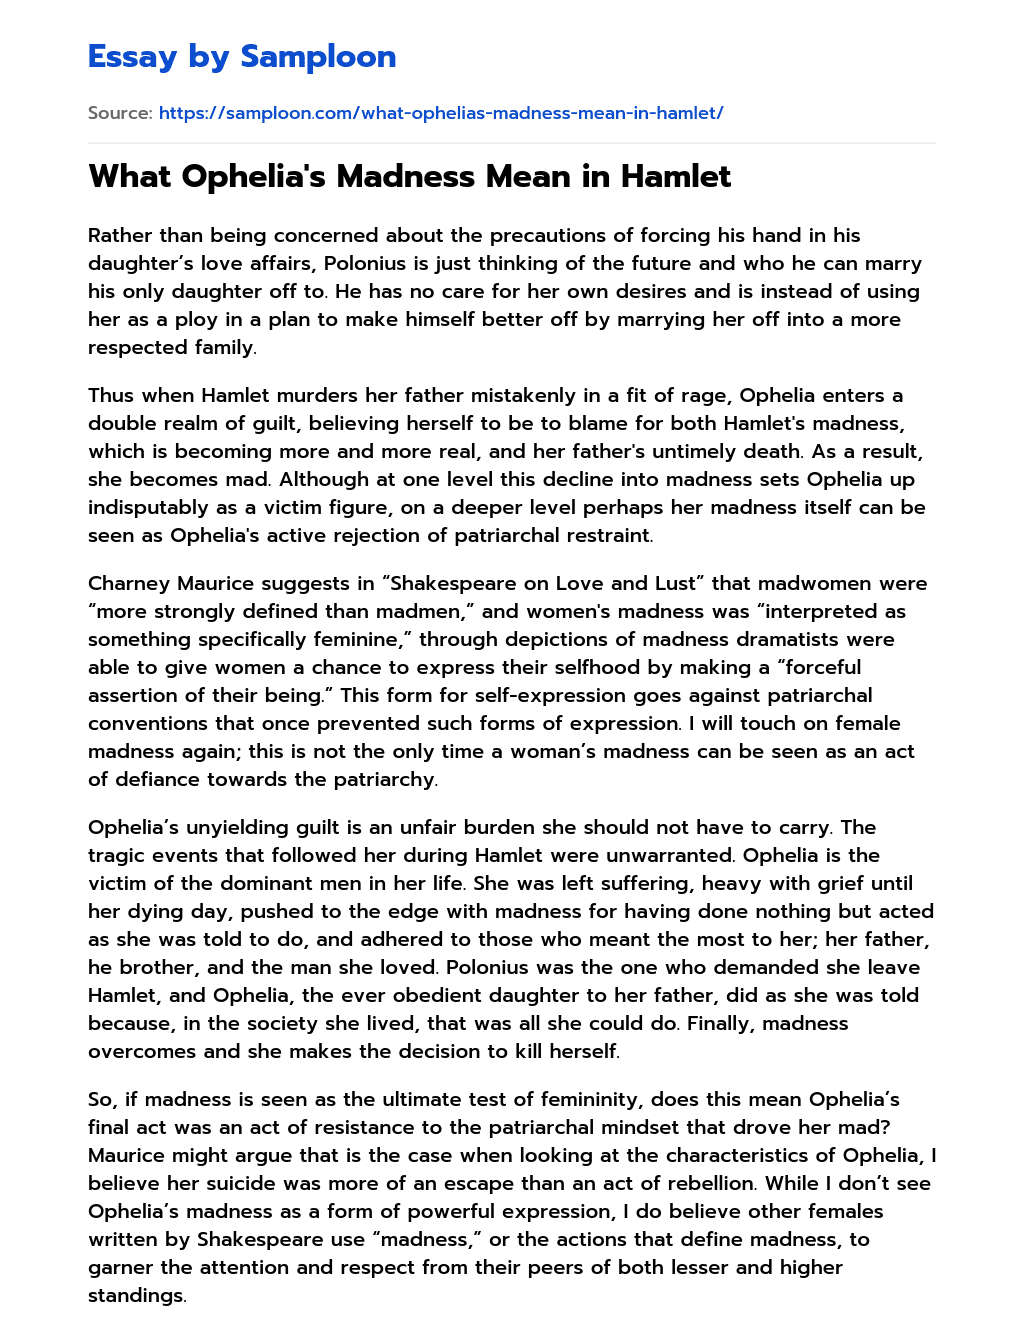 What Ophelia’s Madness Mean in Hamlet essay